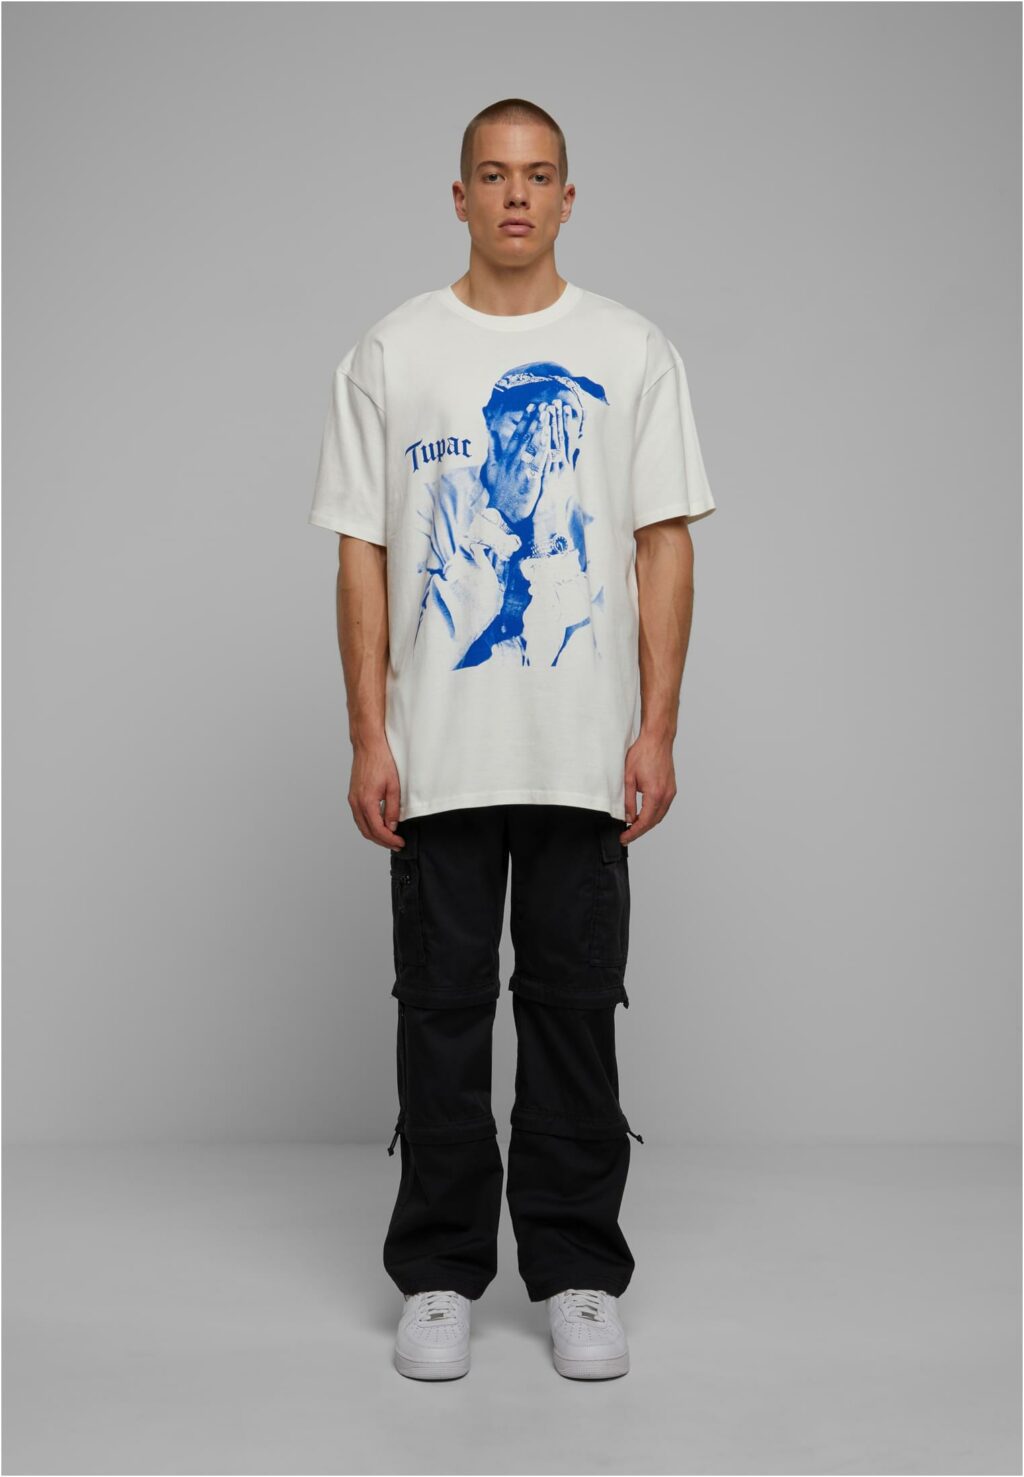 2Pac Me Against the World Oversize Tee ready for dye MT2726